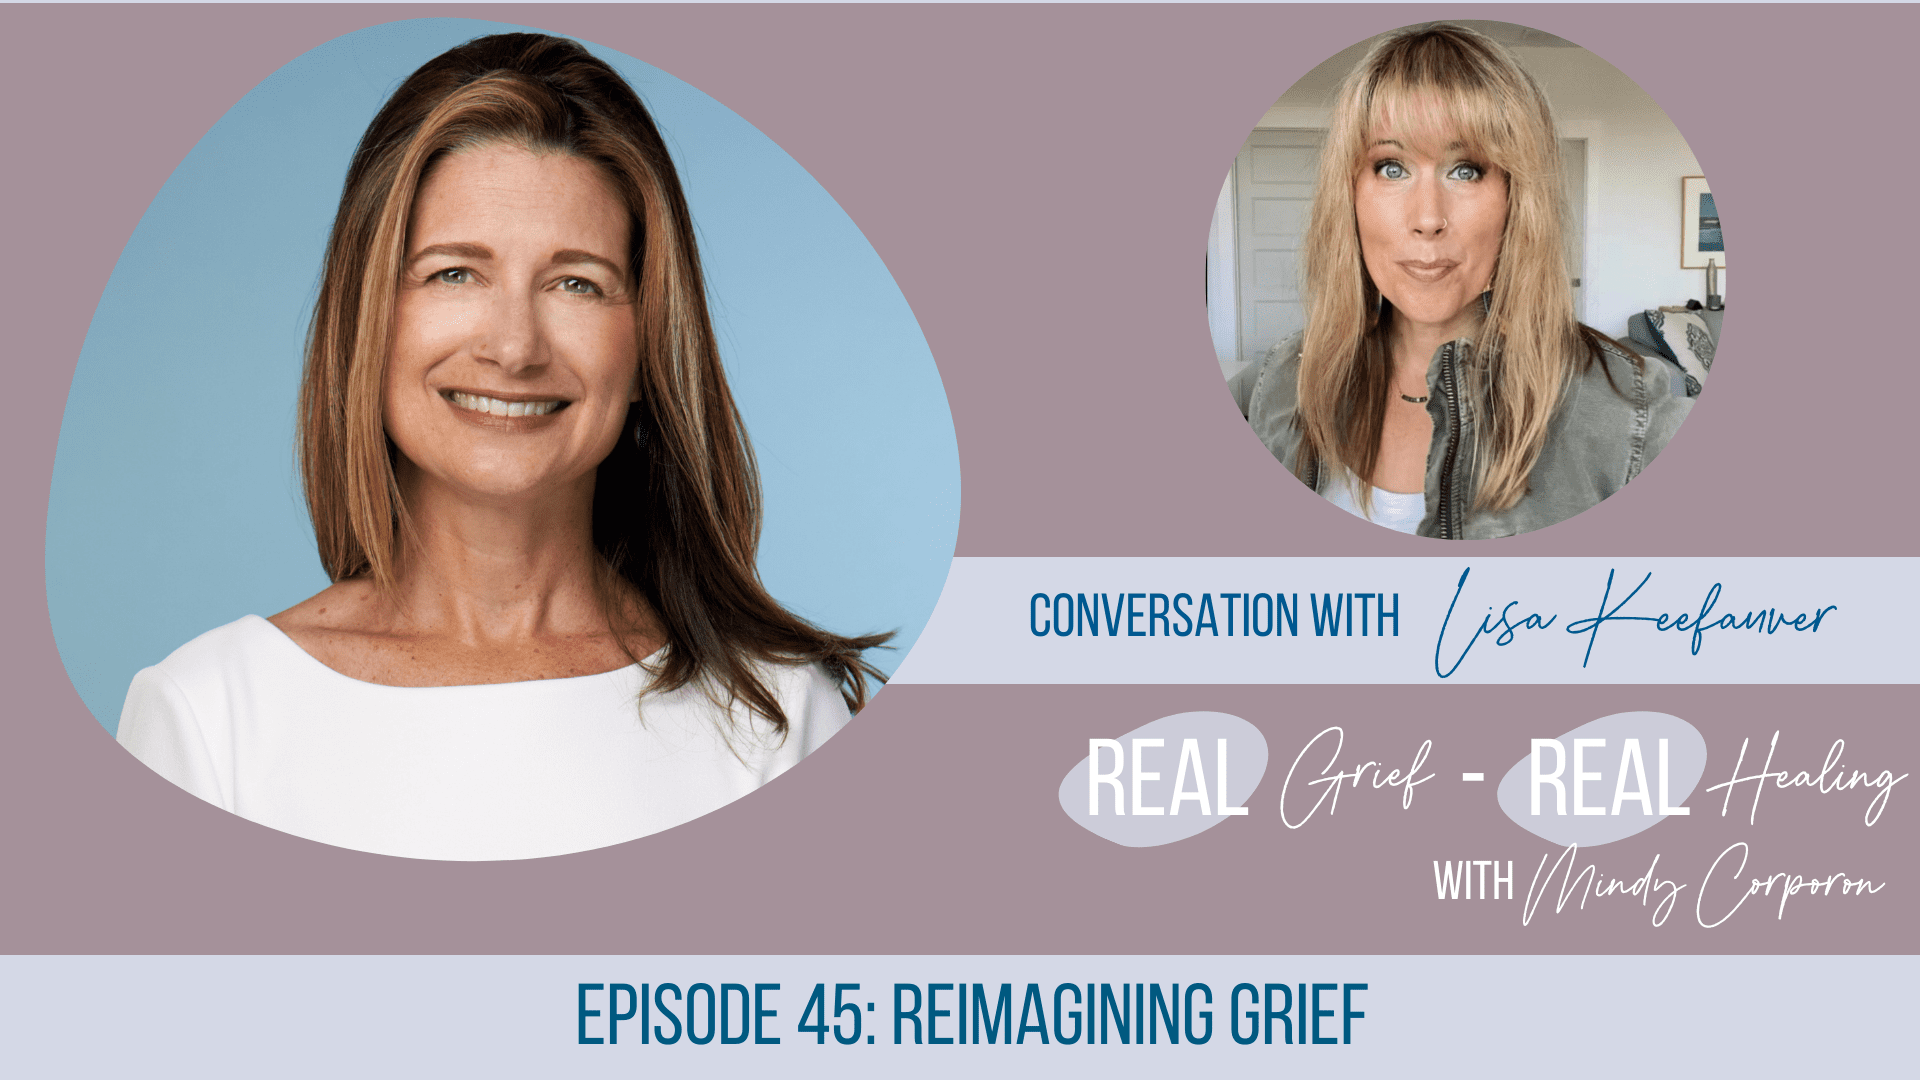 Lisa Keefauver, Grief is a Sneaky Bitch, author